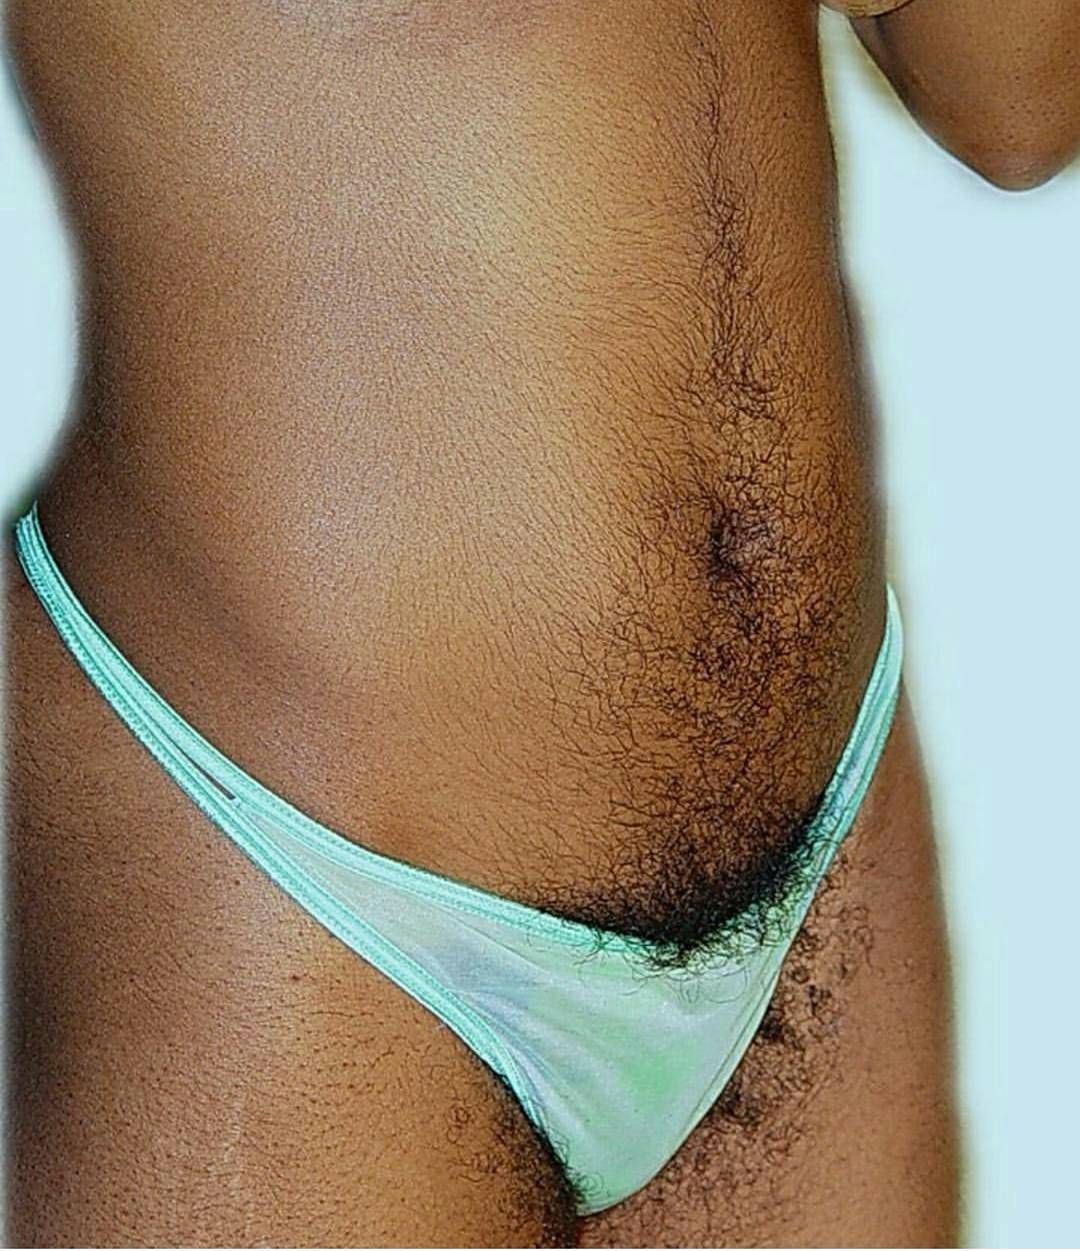 aparna shirodkar recommends hairy girls in thongs pic